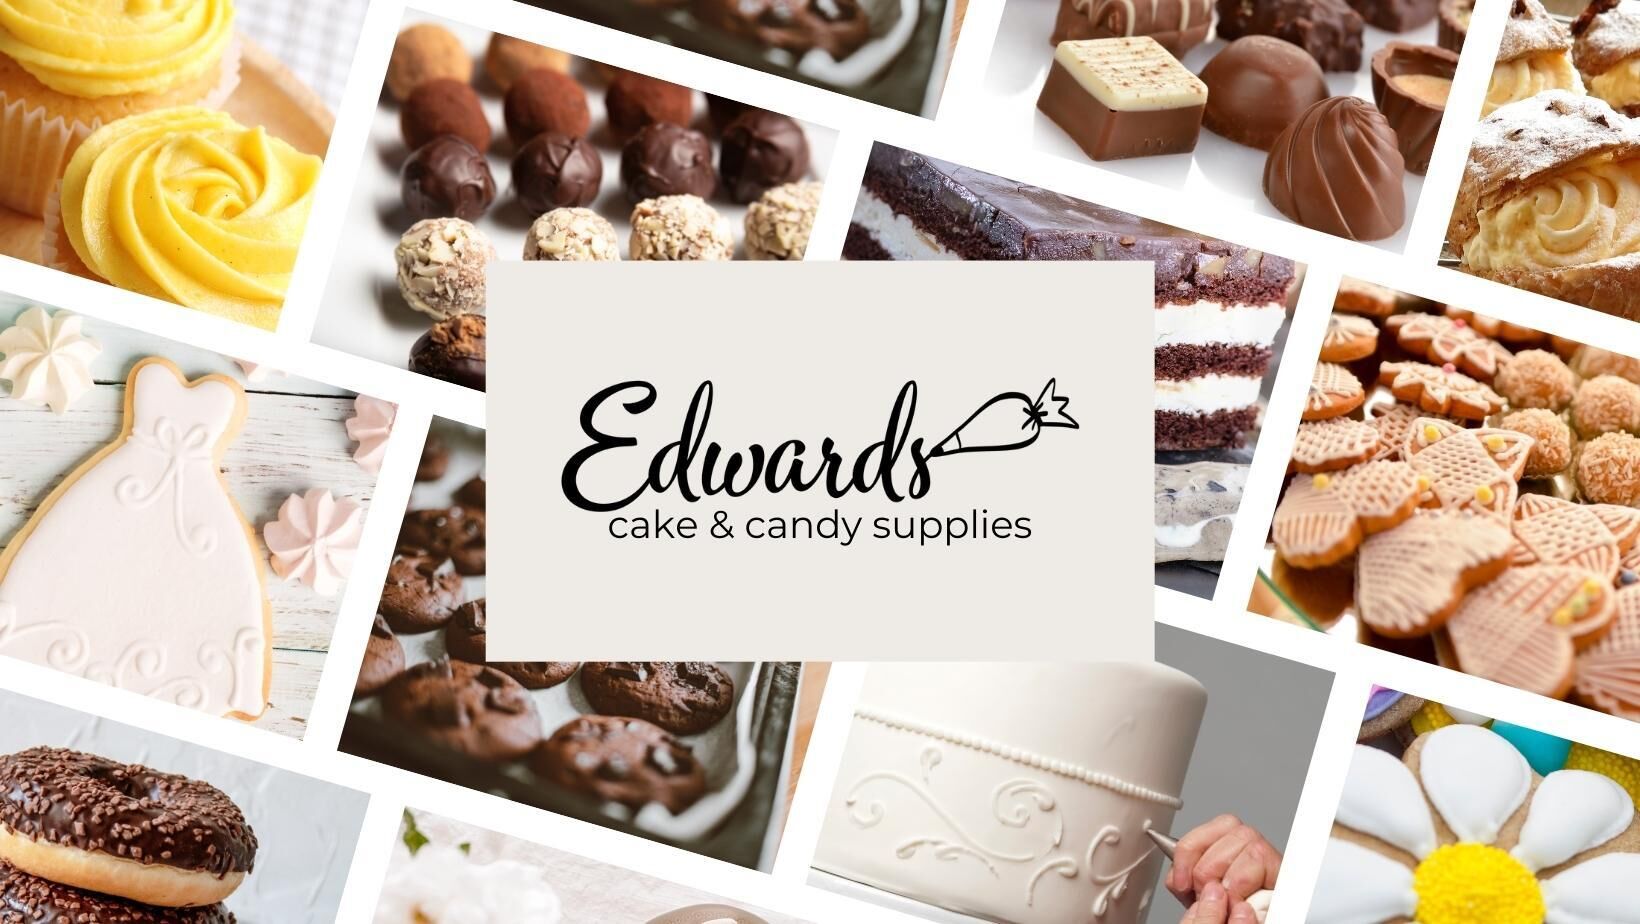 Fran's Cake and Candy Supplies Events | Eventbrite